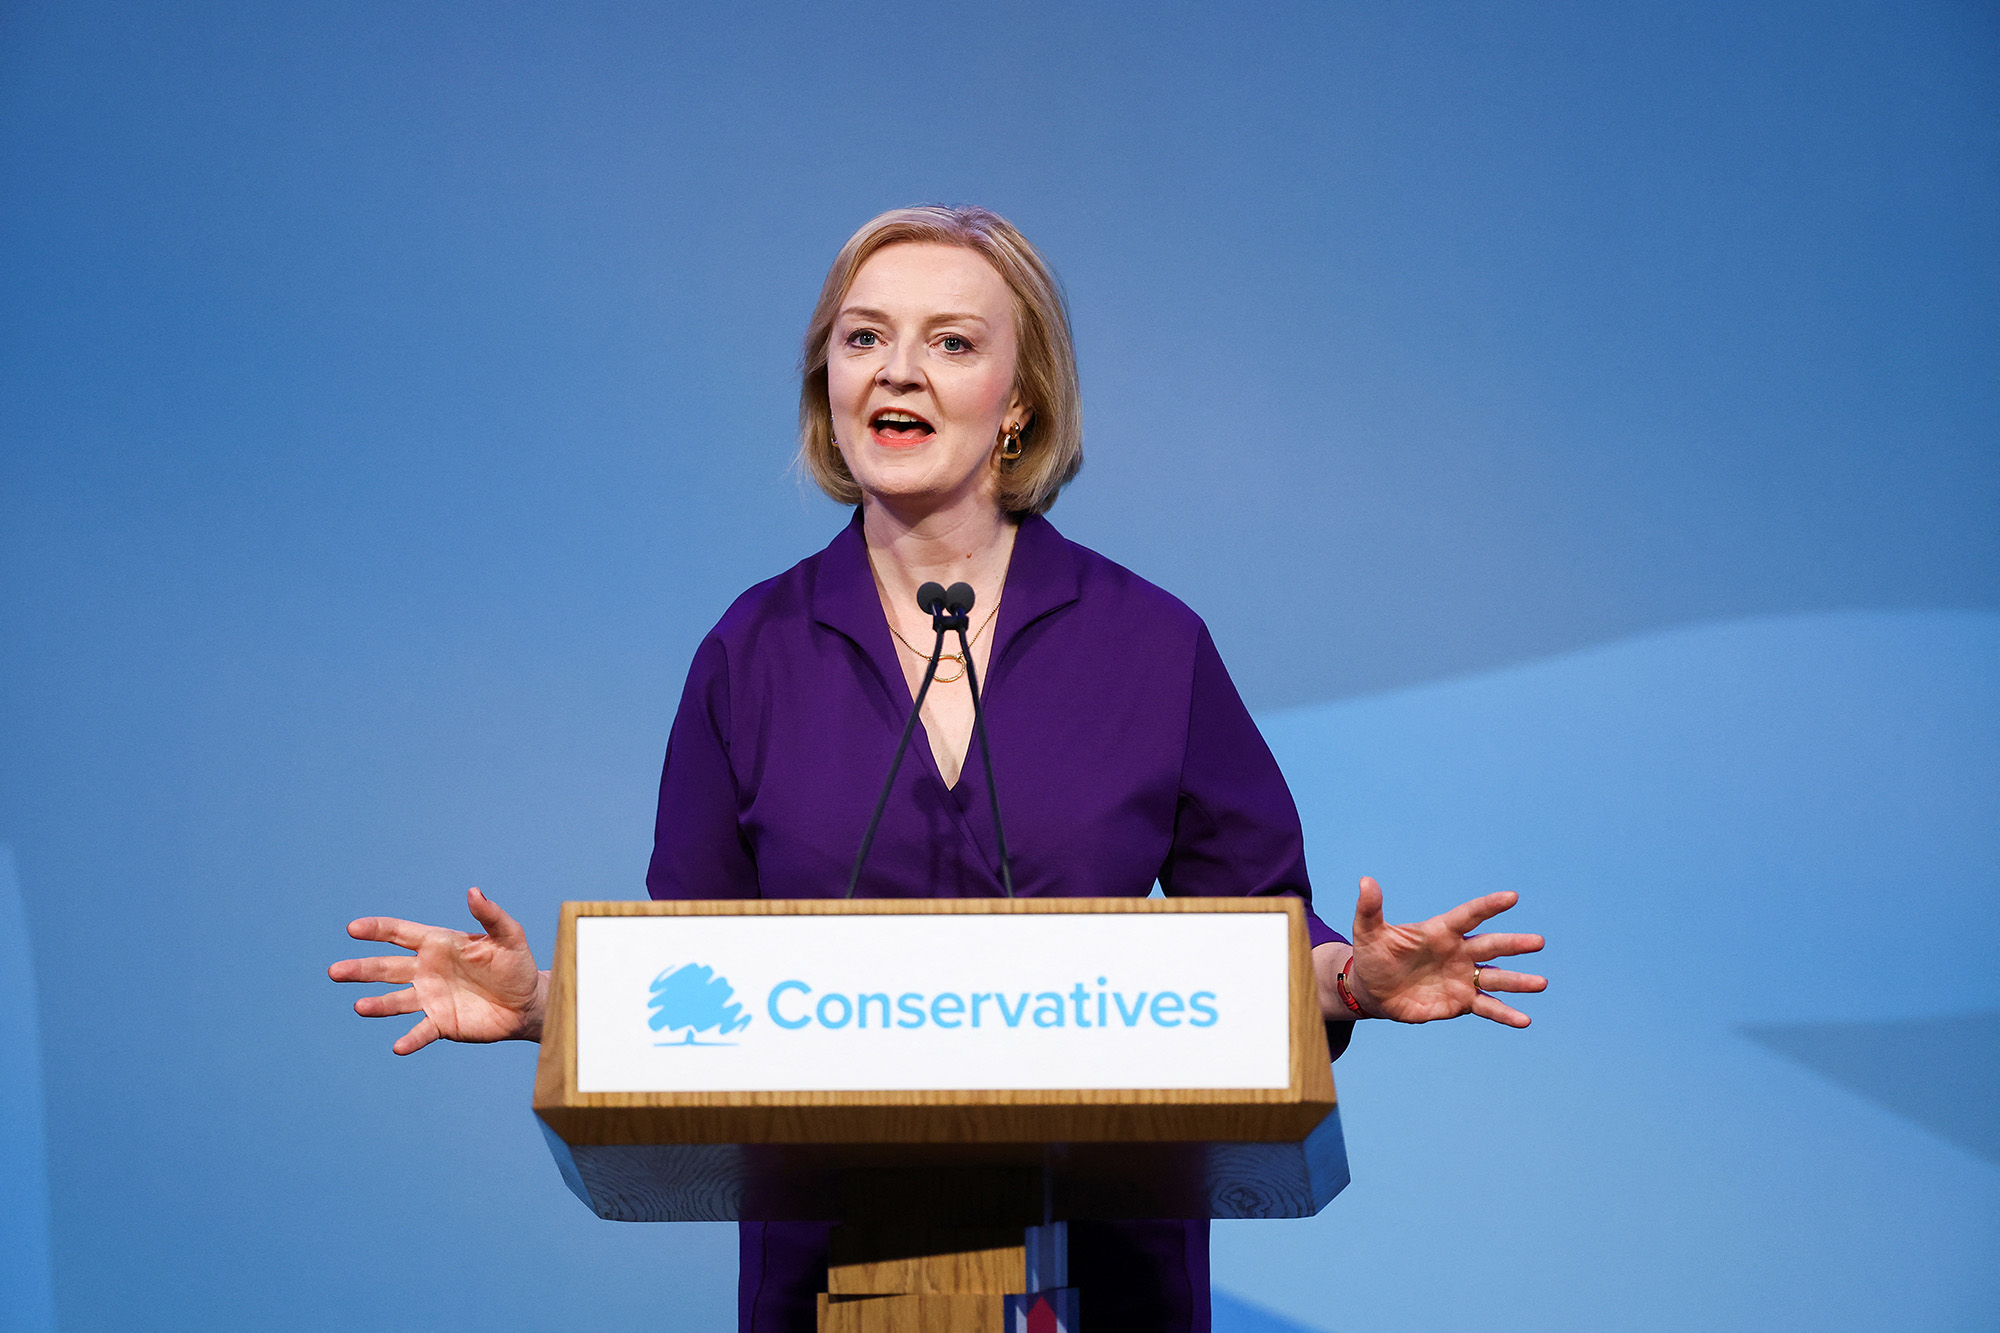 Liz Truss speaks after being announced as Britain's next Prime Minister at The Queen Elizabeth II Centre in London, Britain, on September 5.